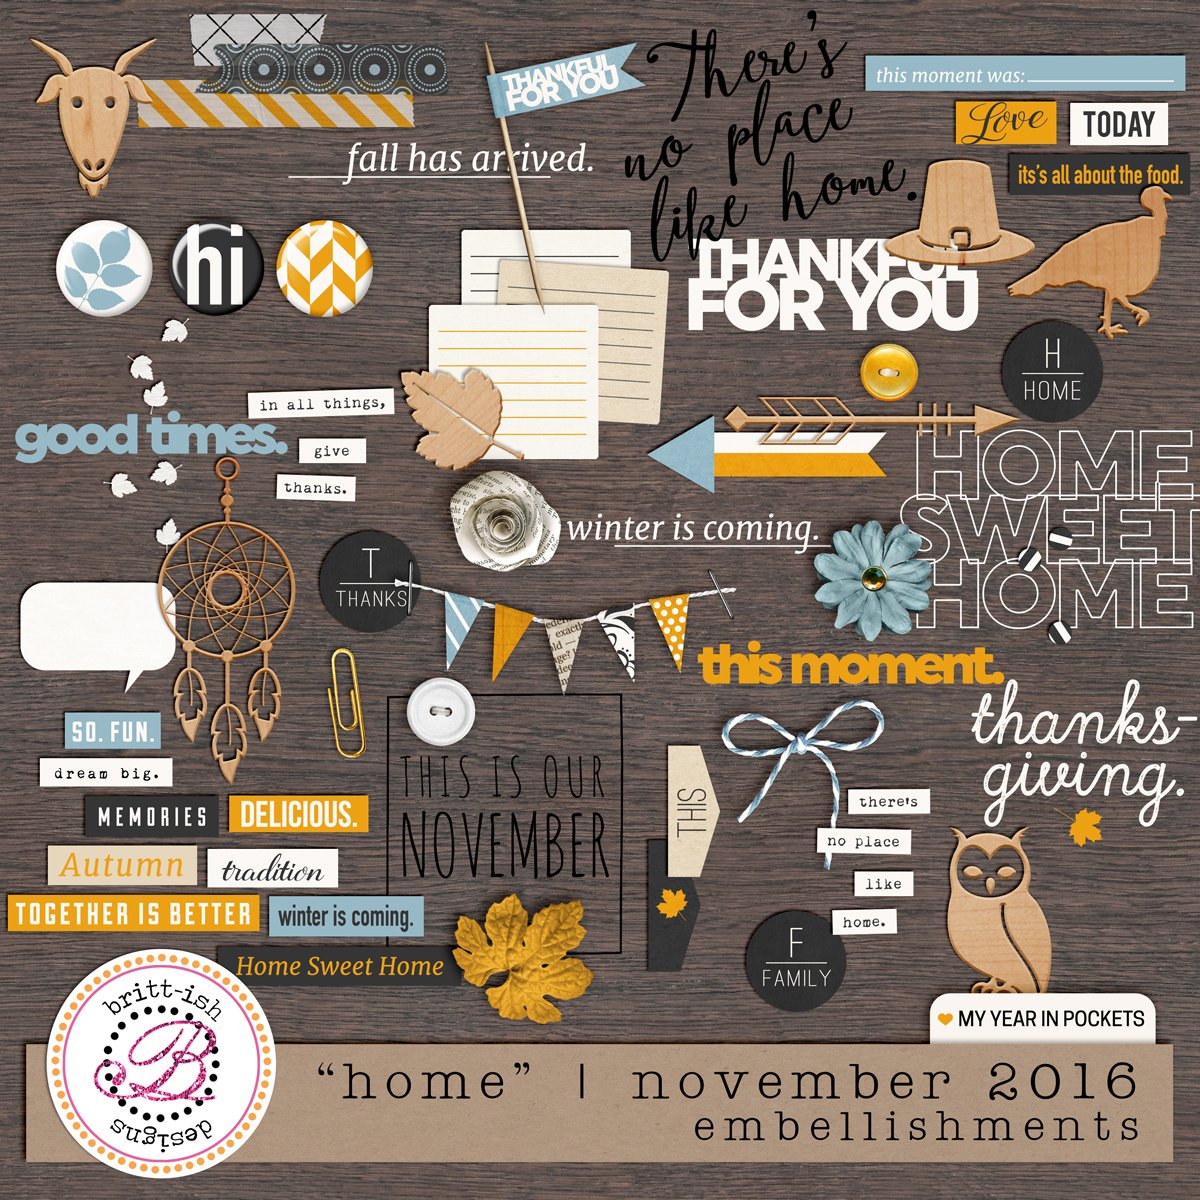 My Year In Pockets: "Home" | November 2016 (Embellishments)